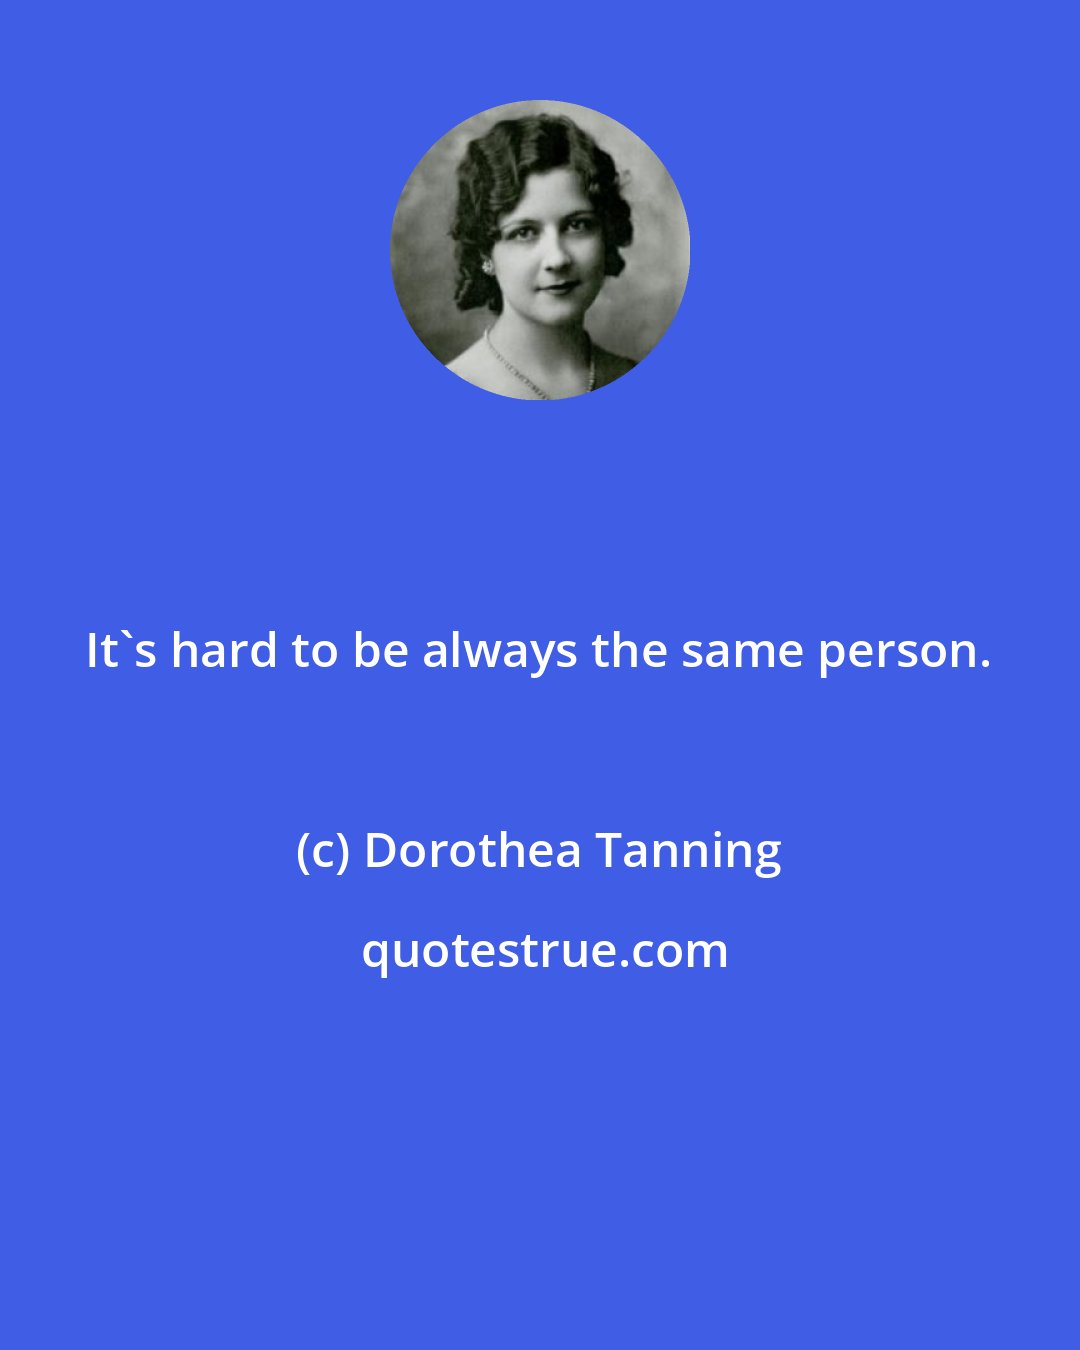 Dorothea Tanning: It's hard to be always the same person.